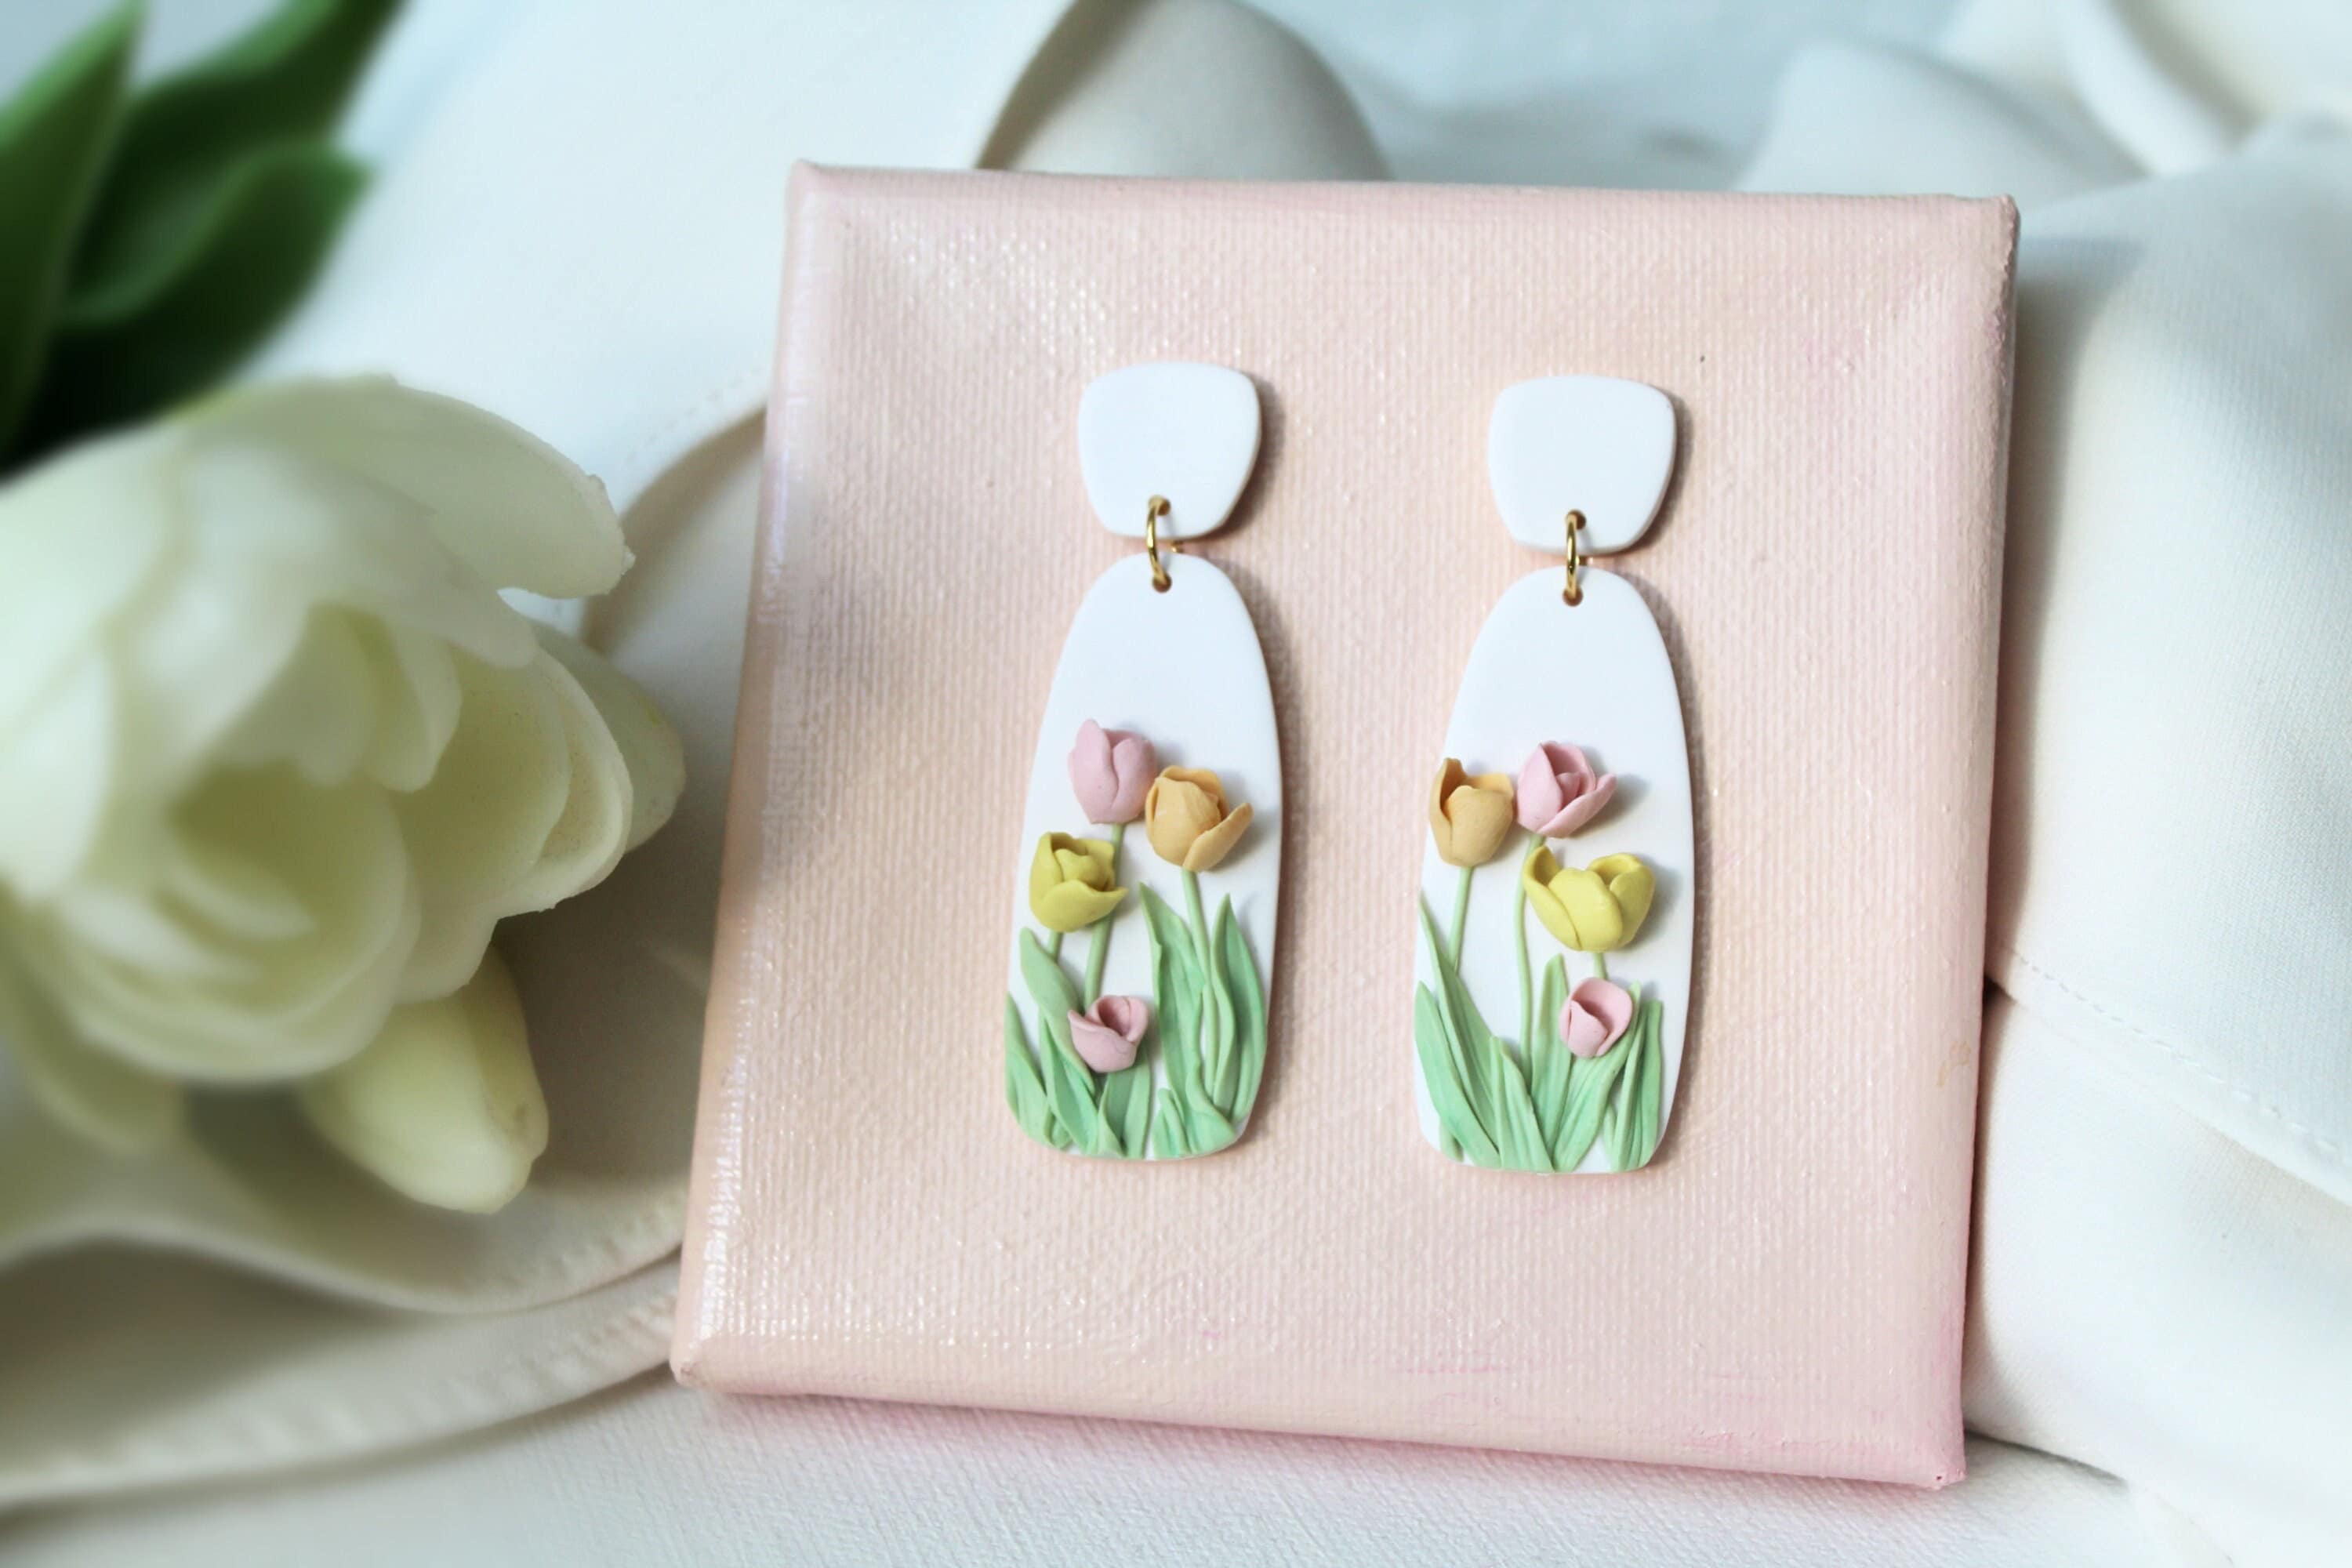 Aggregate more than 137 polymer clay flower earrings super hot